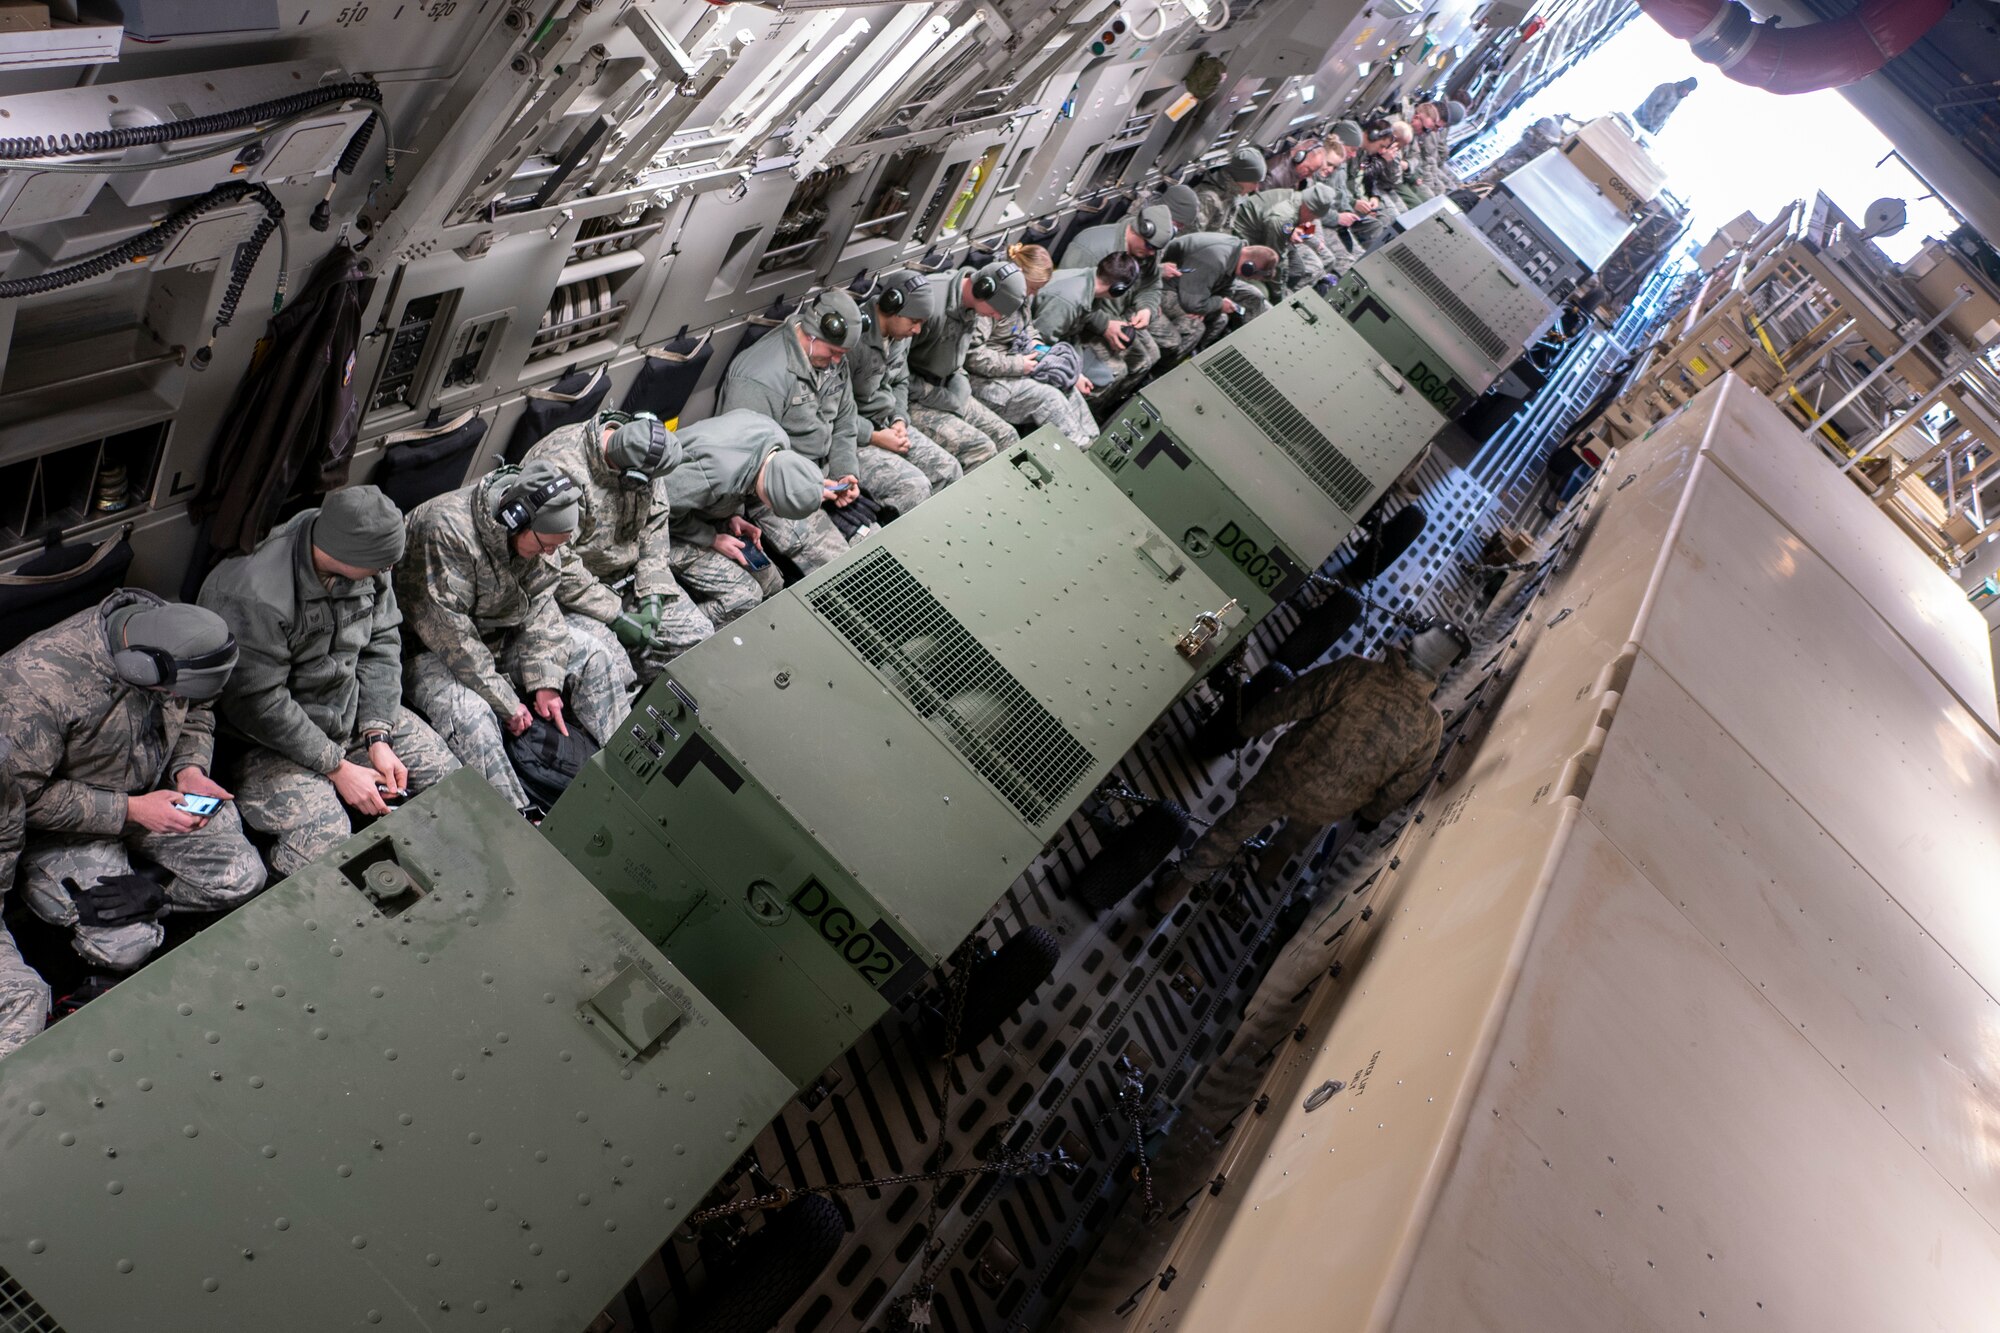 Members and cargo from the 119th Wing are loaded onto a Hawaii Air National Guard C-17 Globemaster III